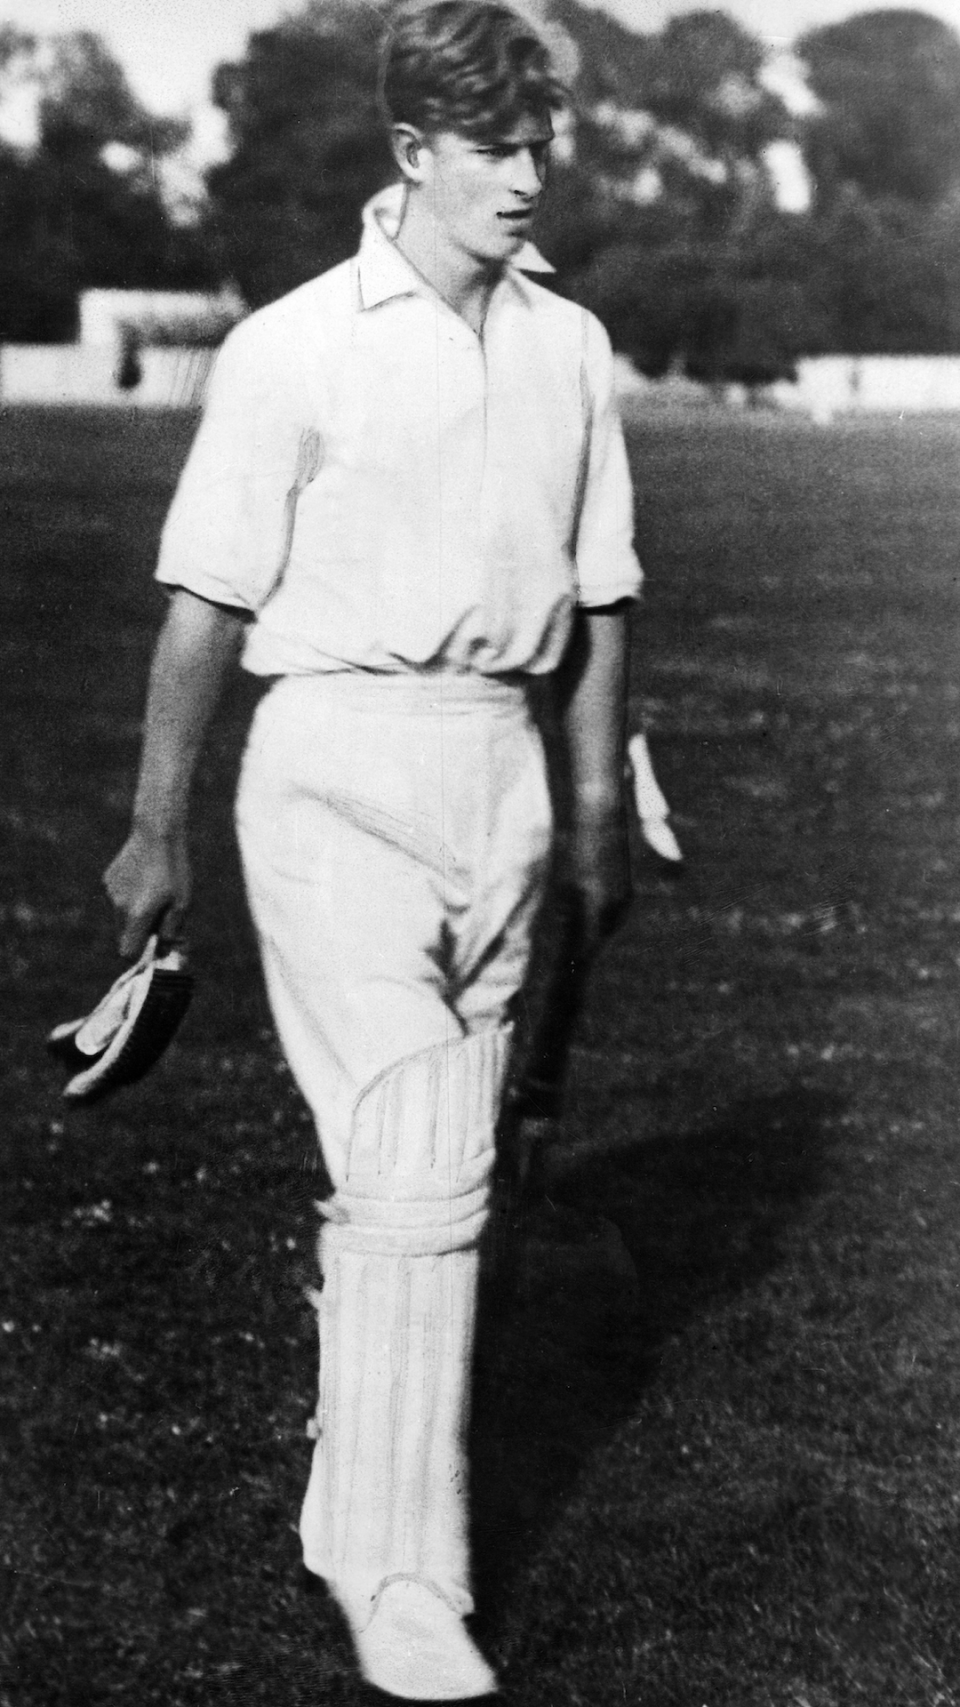 <p> After being born into exile on the island of Corfu, Prince Philip - who was a member of the Greek and Danish royal families - was educated at Gordonstoun. He was pictured as a teen playing cricket at the Scottish school in 1939. </p>